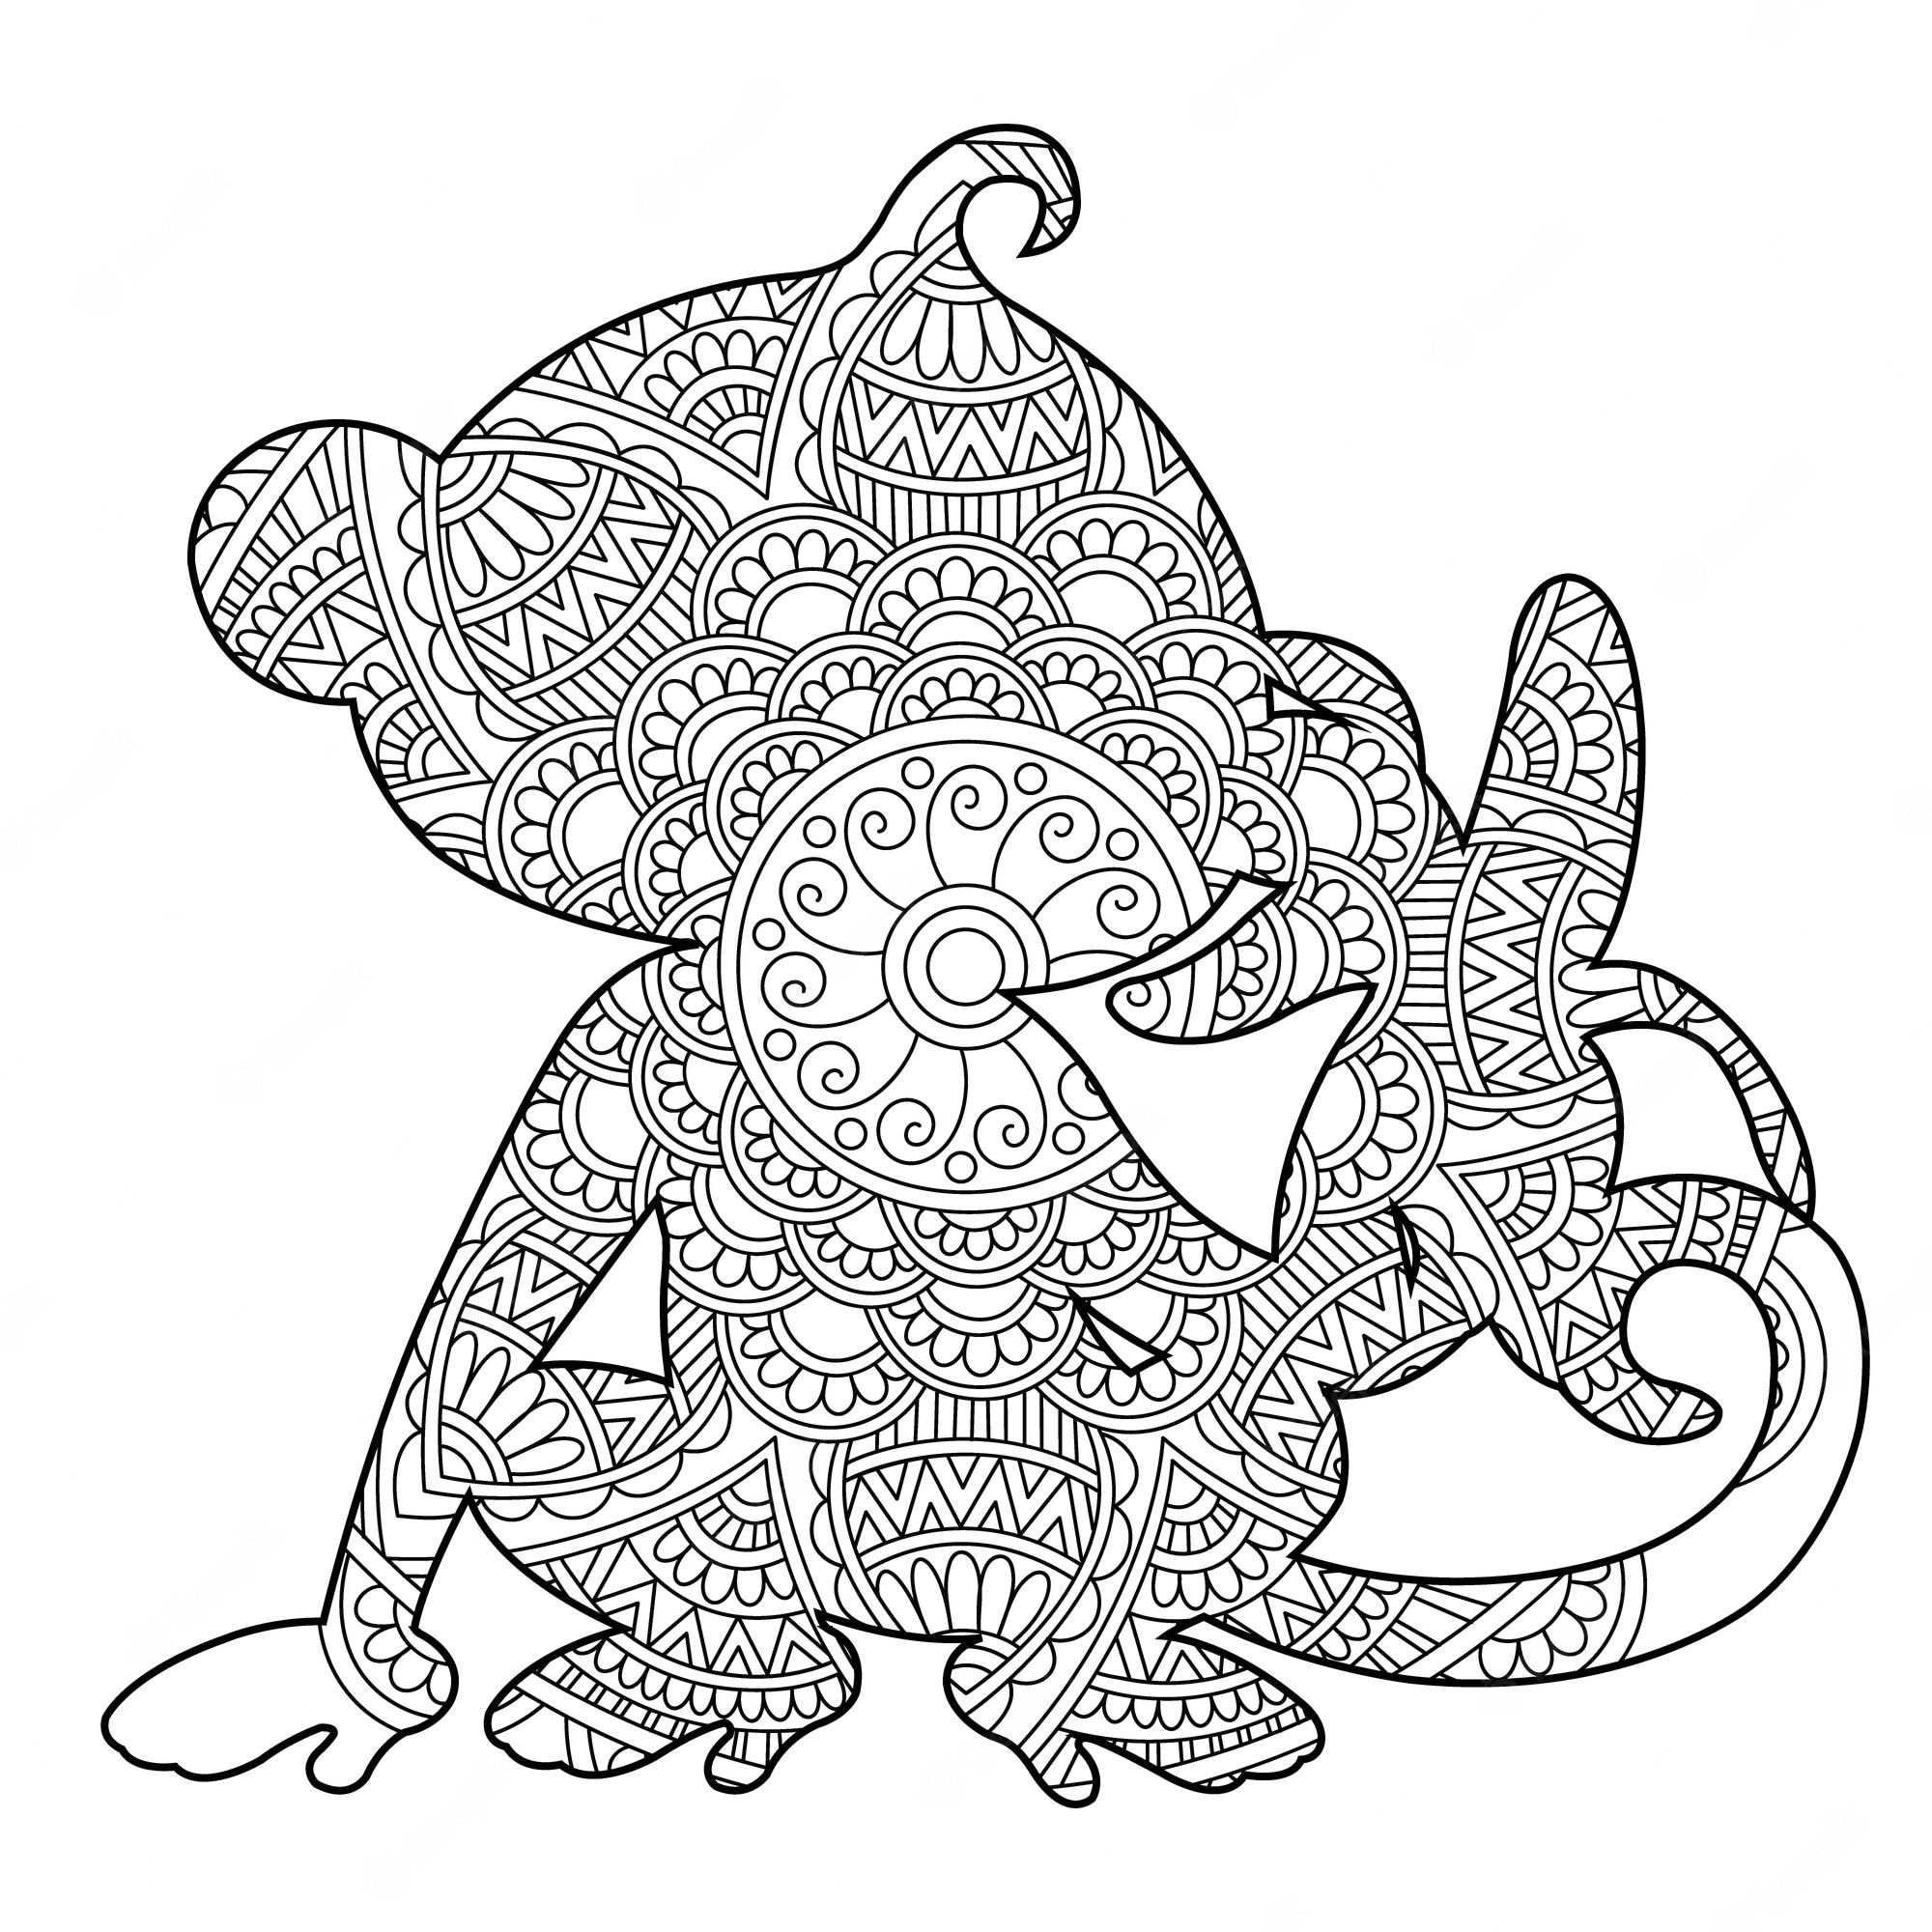 Premium Vector | Zentangle monkey mandala coloring page for adults animal  coloring book antistress coloring page